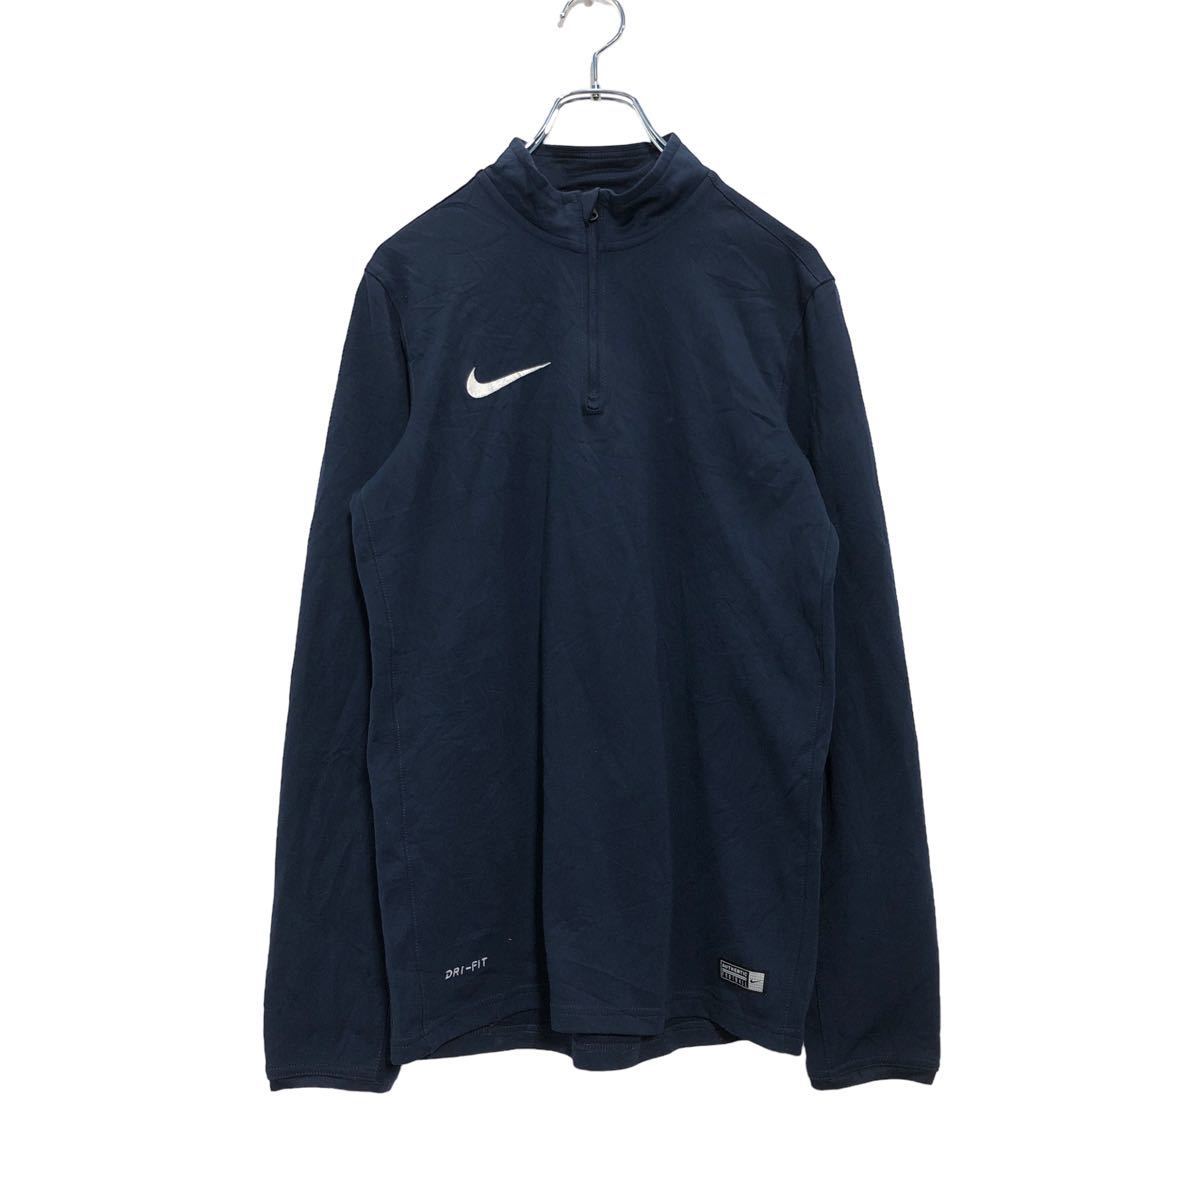 NIKE DRI-FIT half Zip jersey S size Nike sport navy blue navy old clothes . America buying up a504-6373